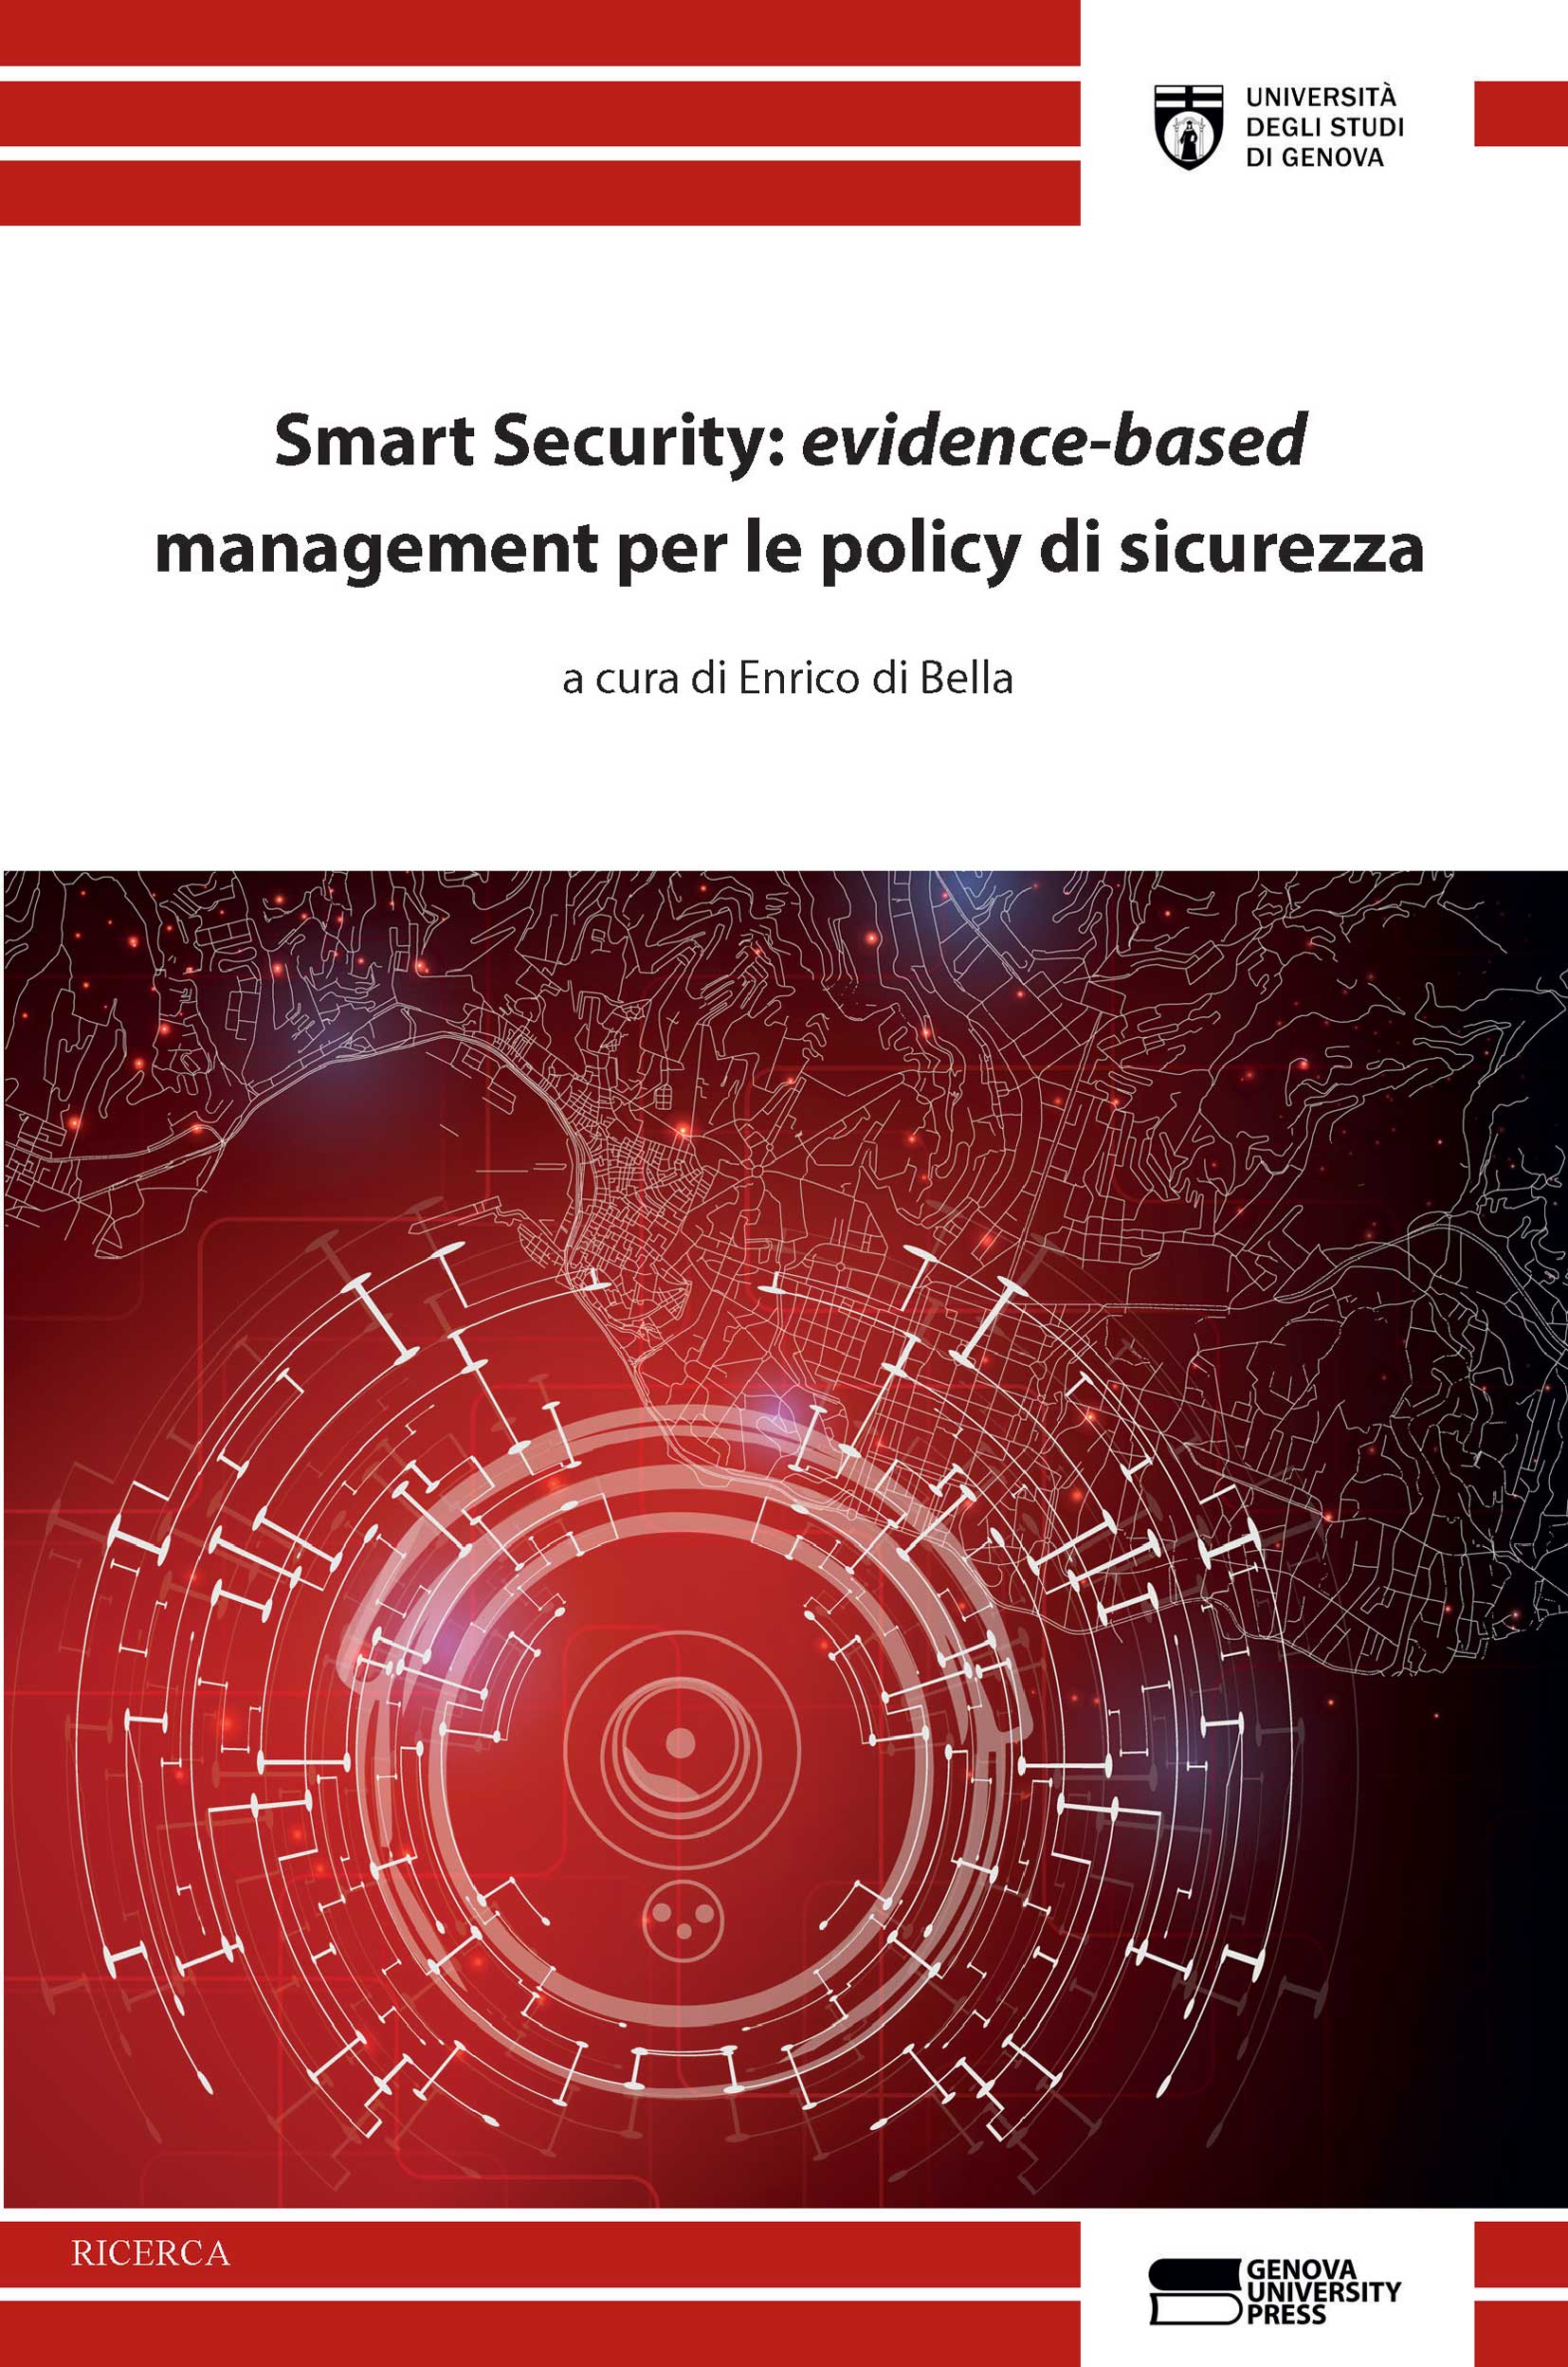 Smart Security: evidence-based management per le policy di sicurezza